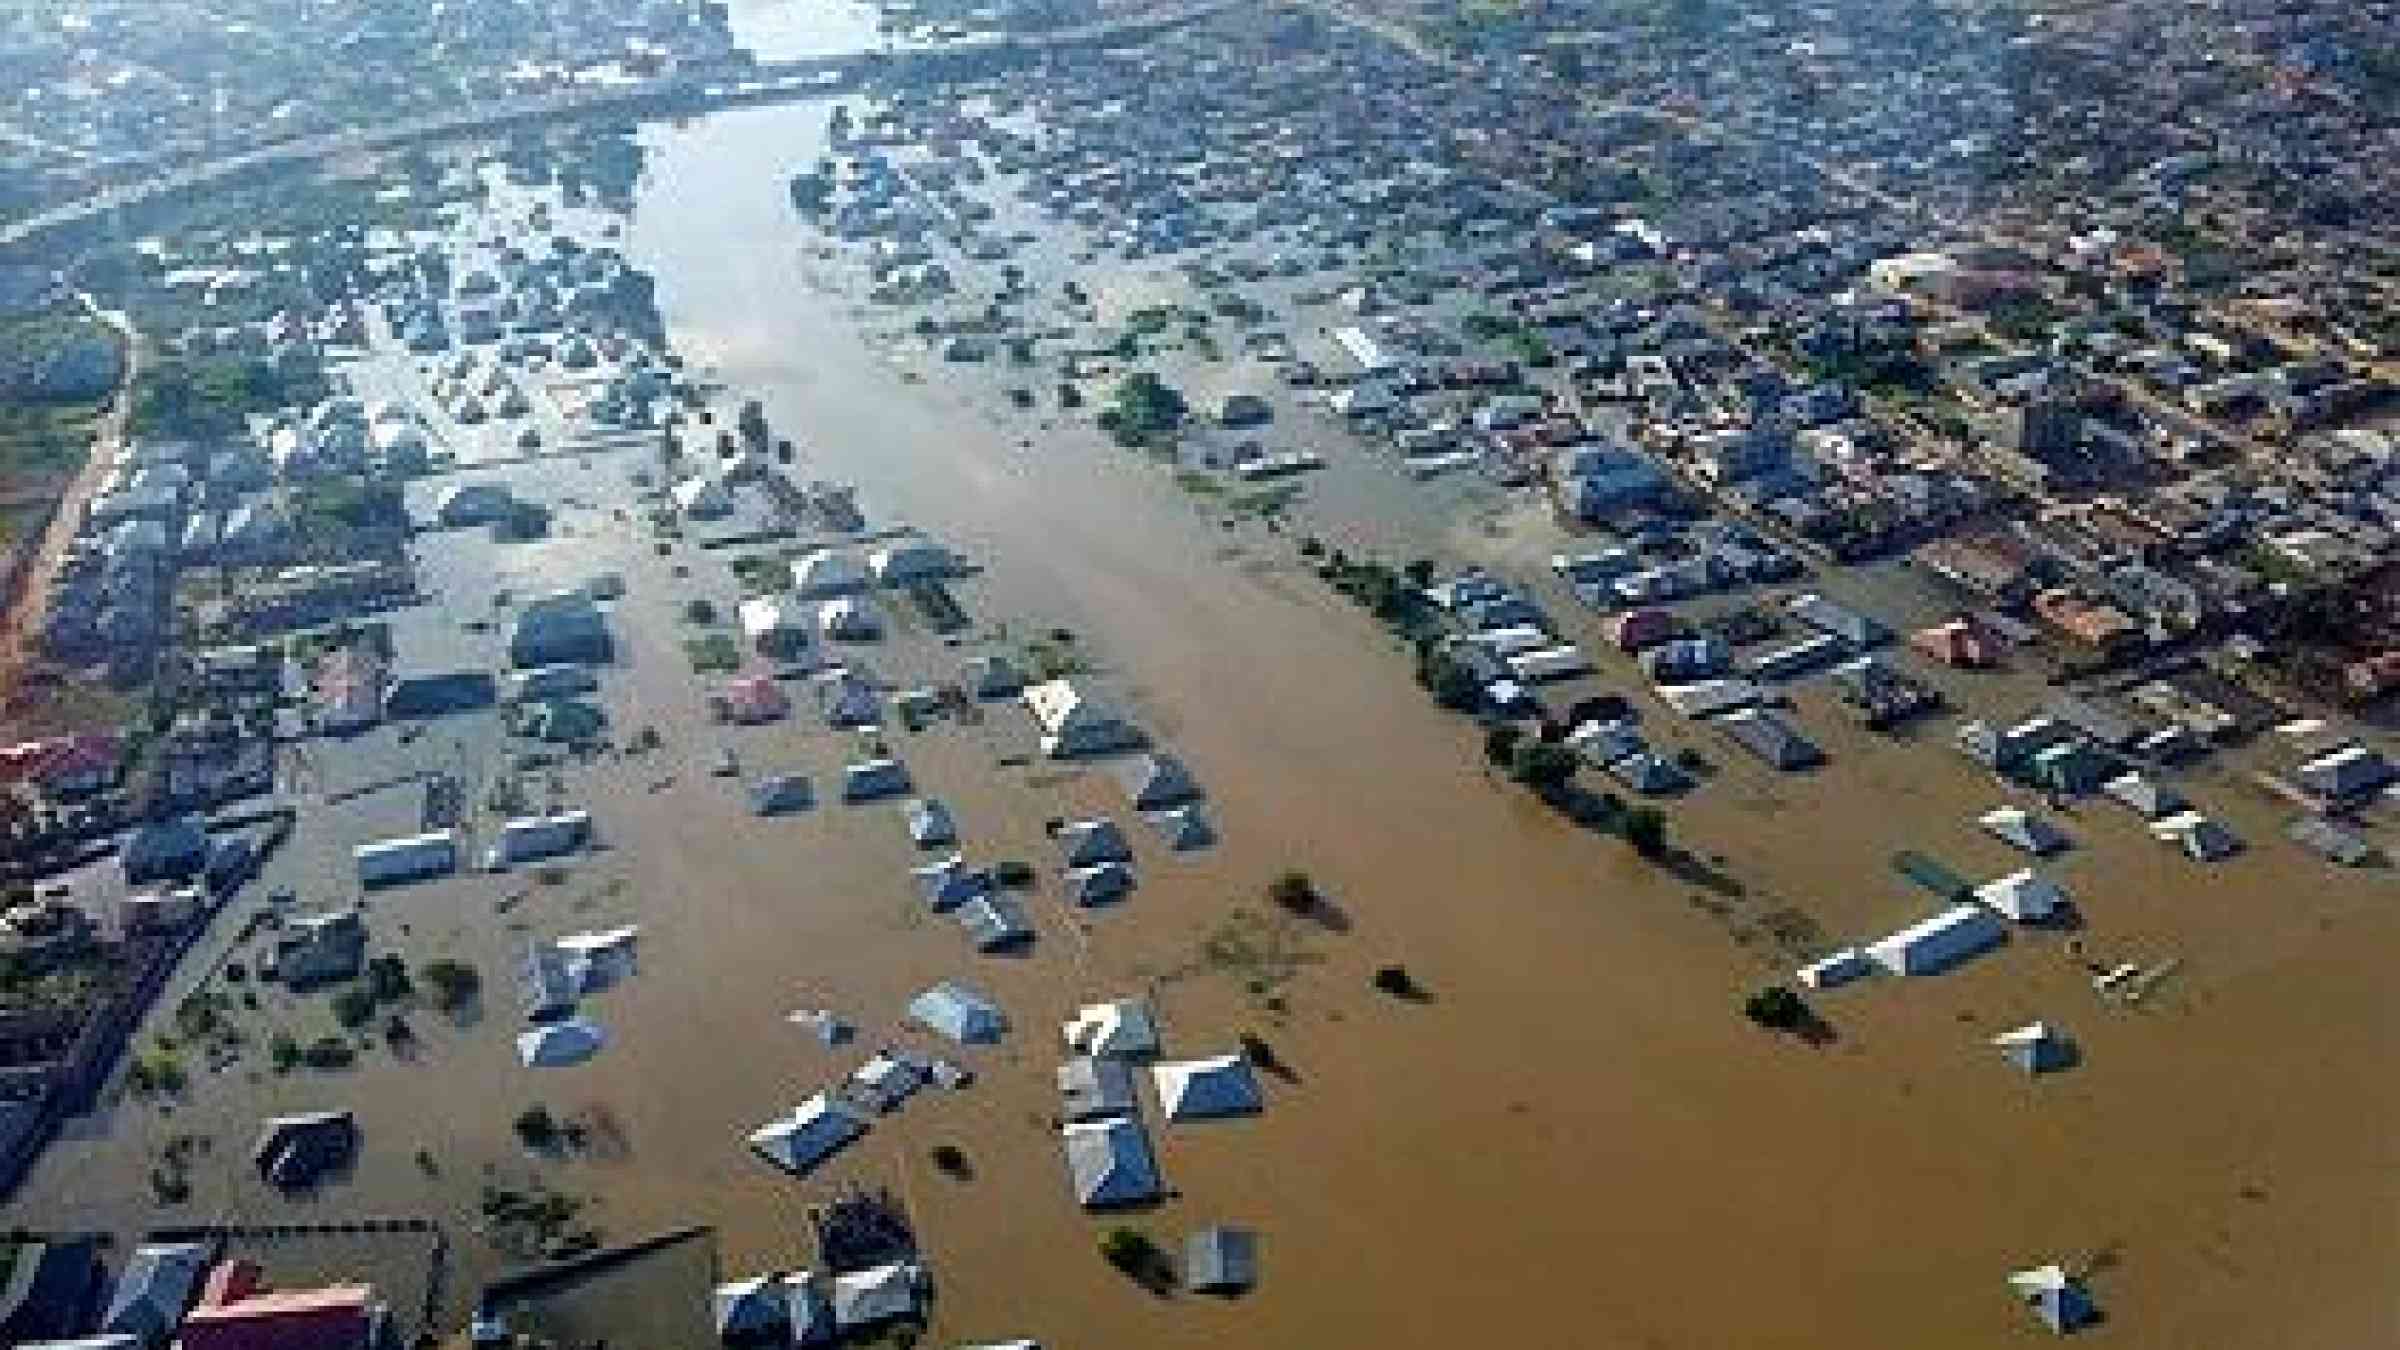 Photo copyright NEMA. The 2012 floods which impacted the country's GDP and displaced over six million people provided the backdrop to discussions this week between the Nigerian Government and UNISDR on disaster risk management.